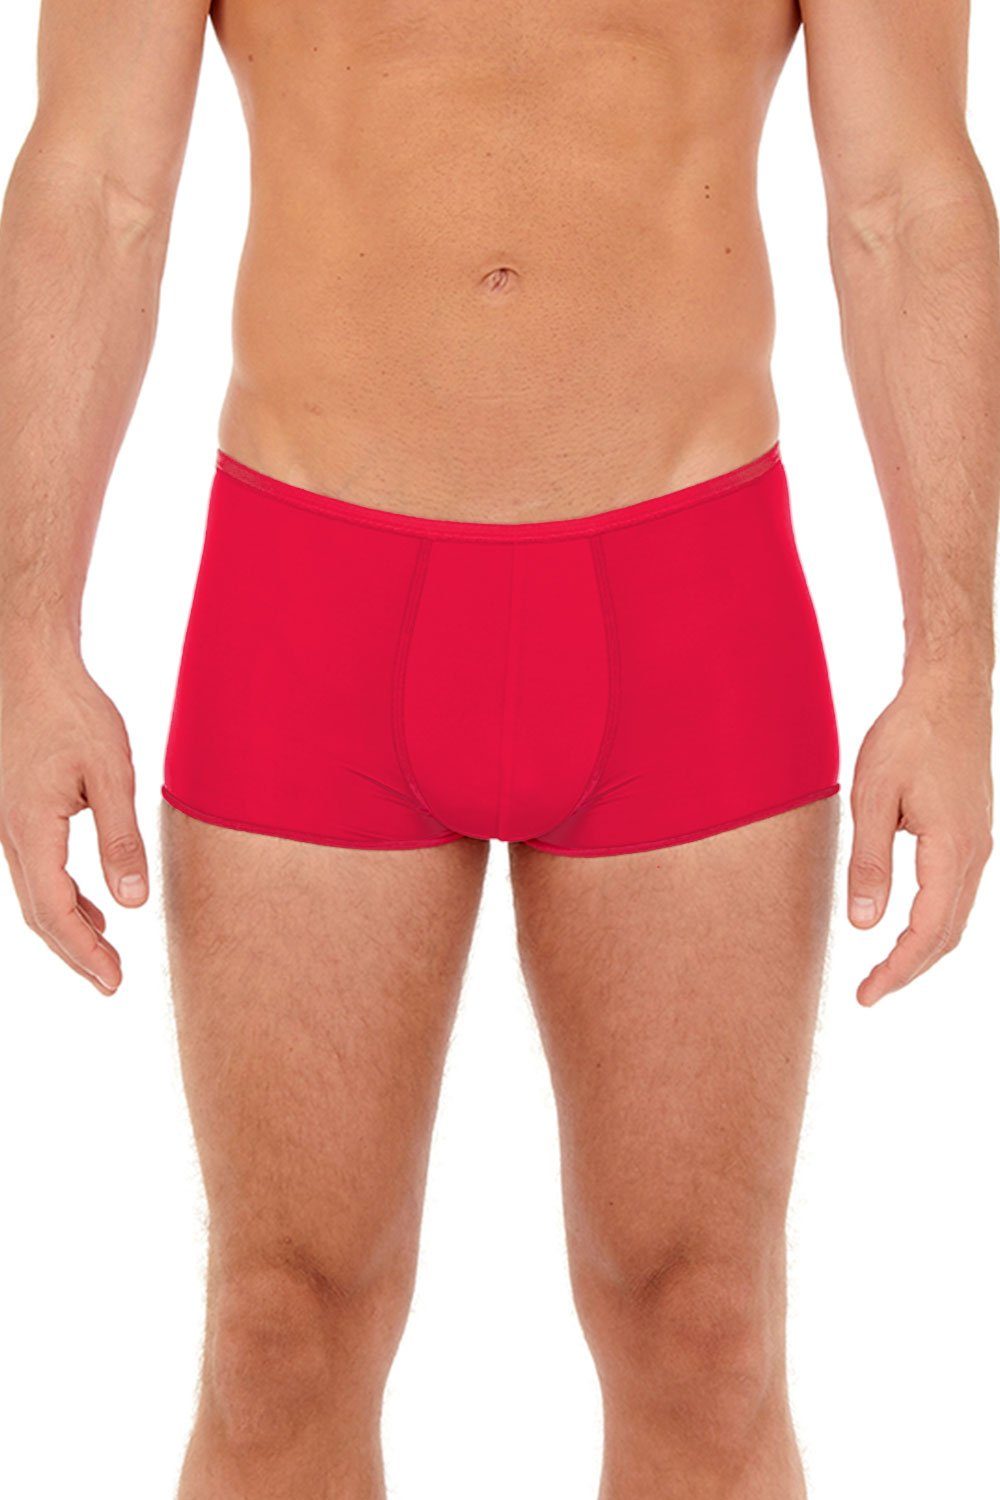 Hipster 404755 Hom Trunk red